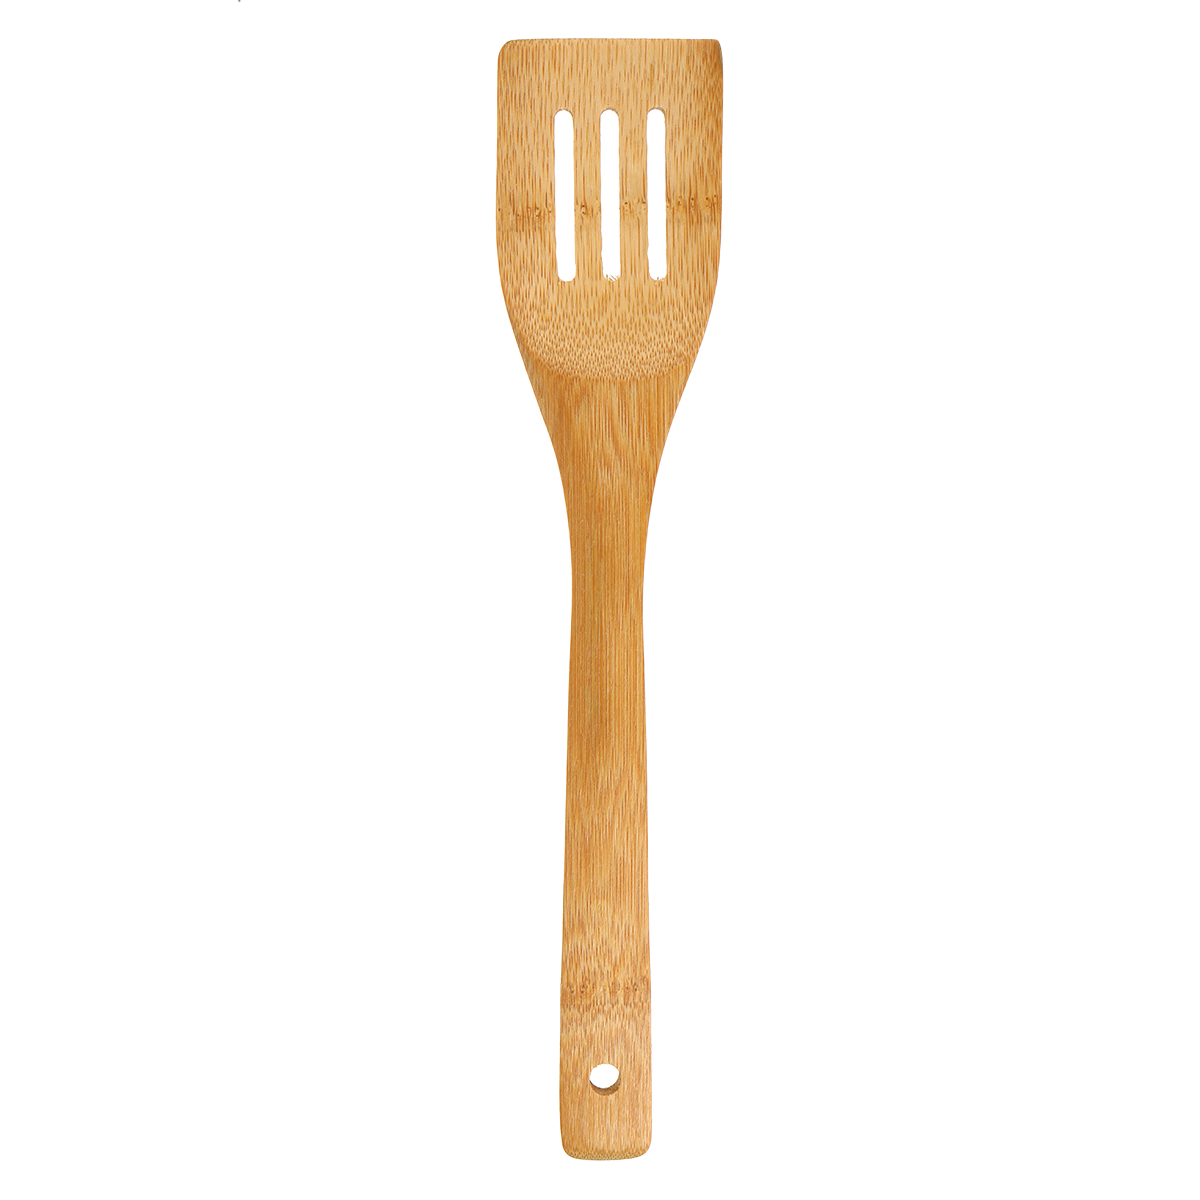 8PCS-Bamboo-Nonstick-Cooking-Utensils-Wooden-Spoons-and-Spatula-Utensil-Set-1680404-9